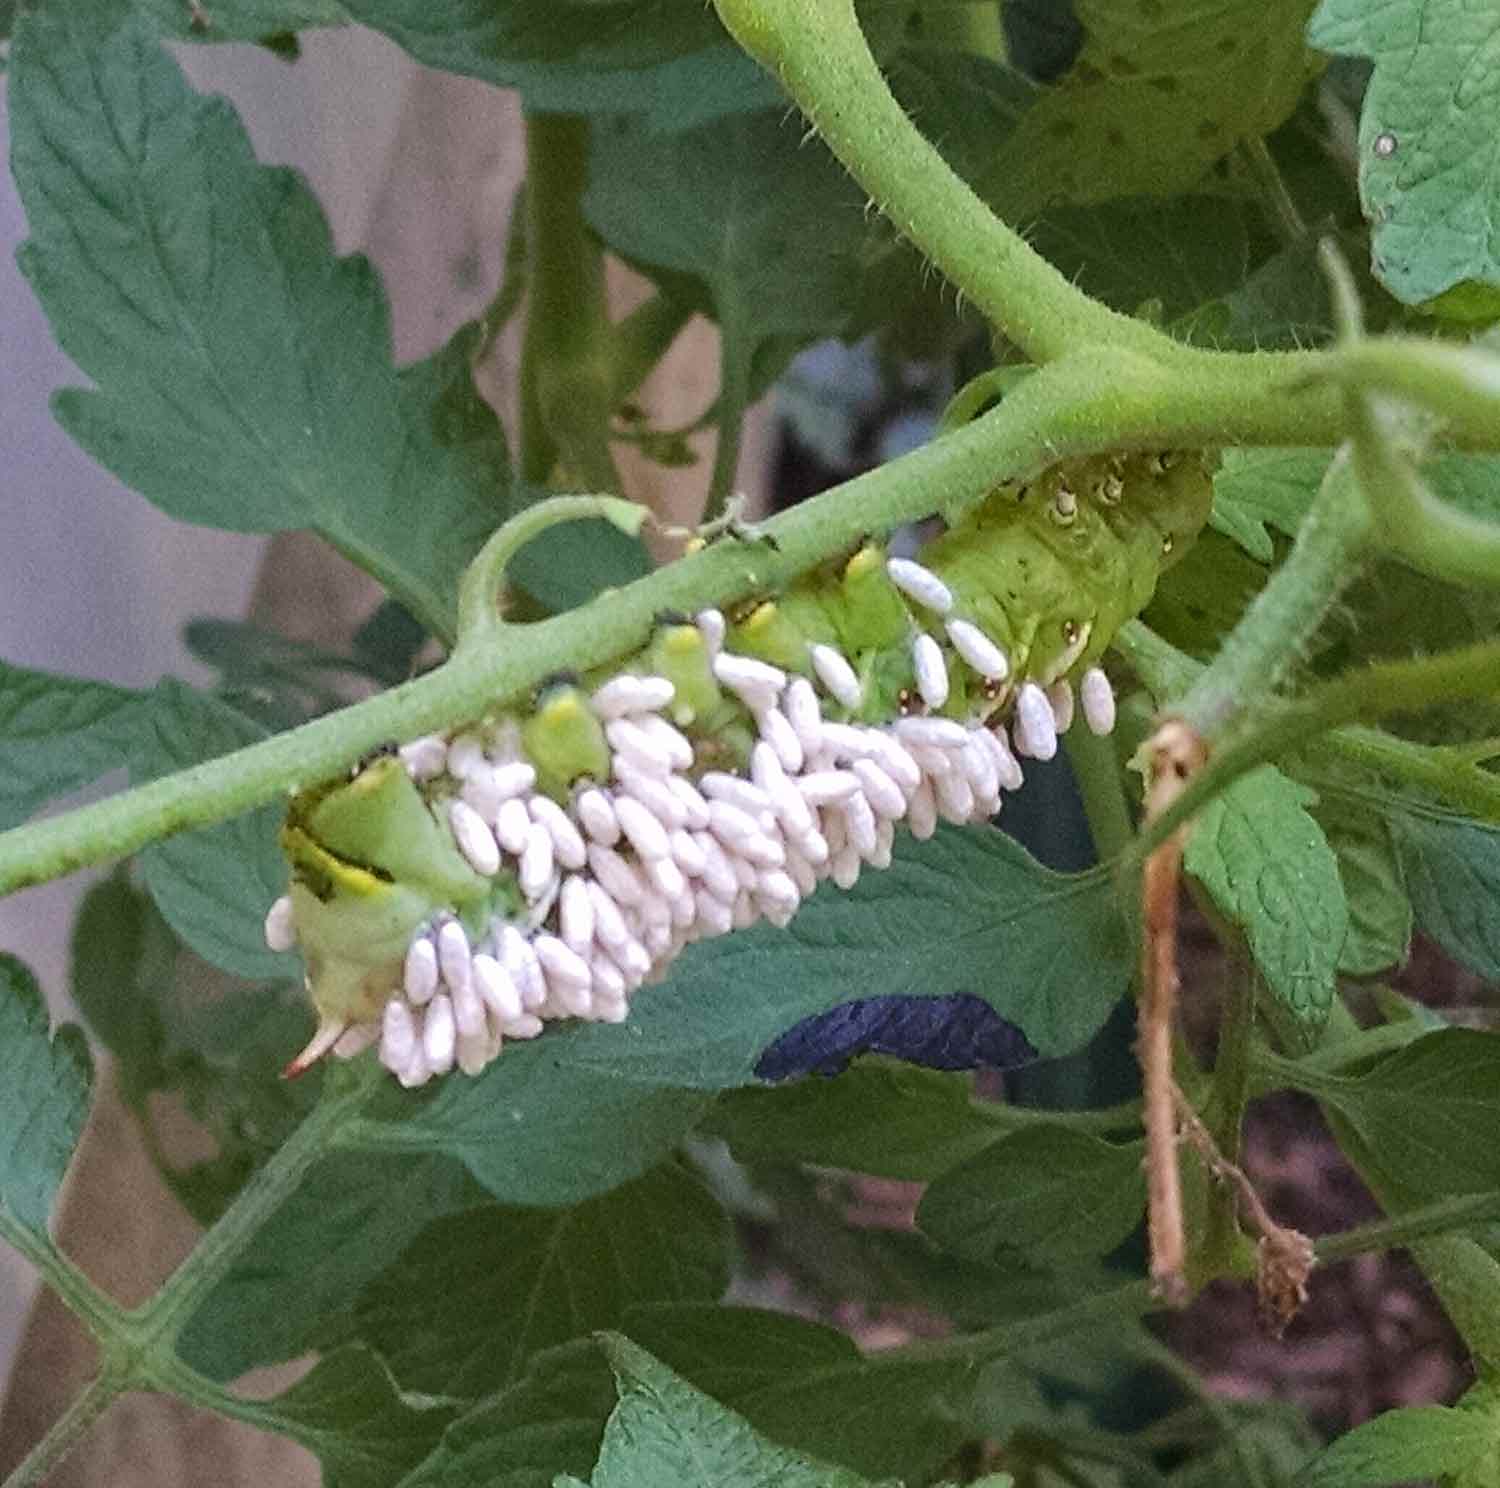 Tomato hornworm covered with the eggs of a braconid wasp.